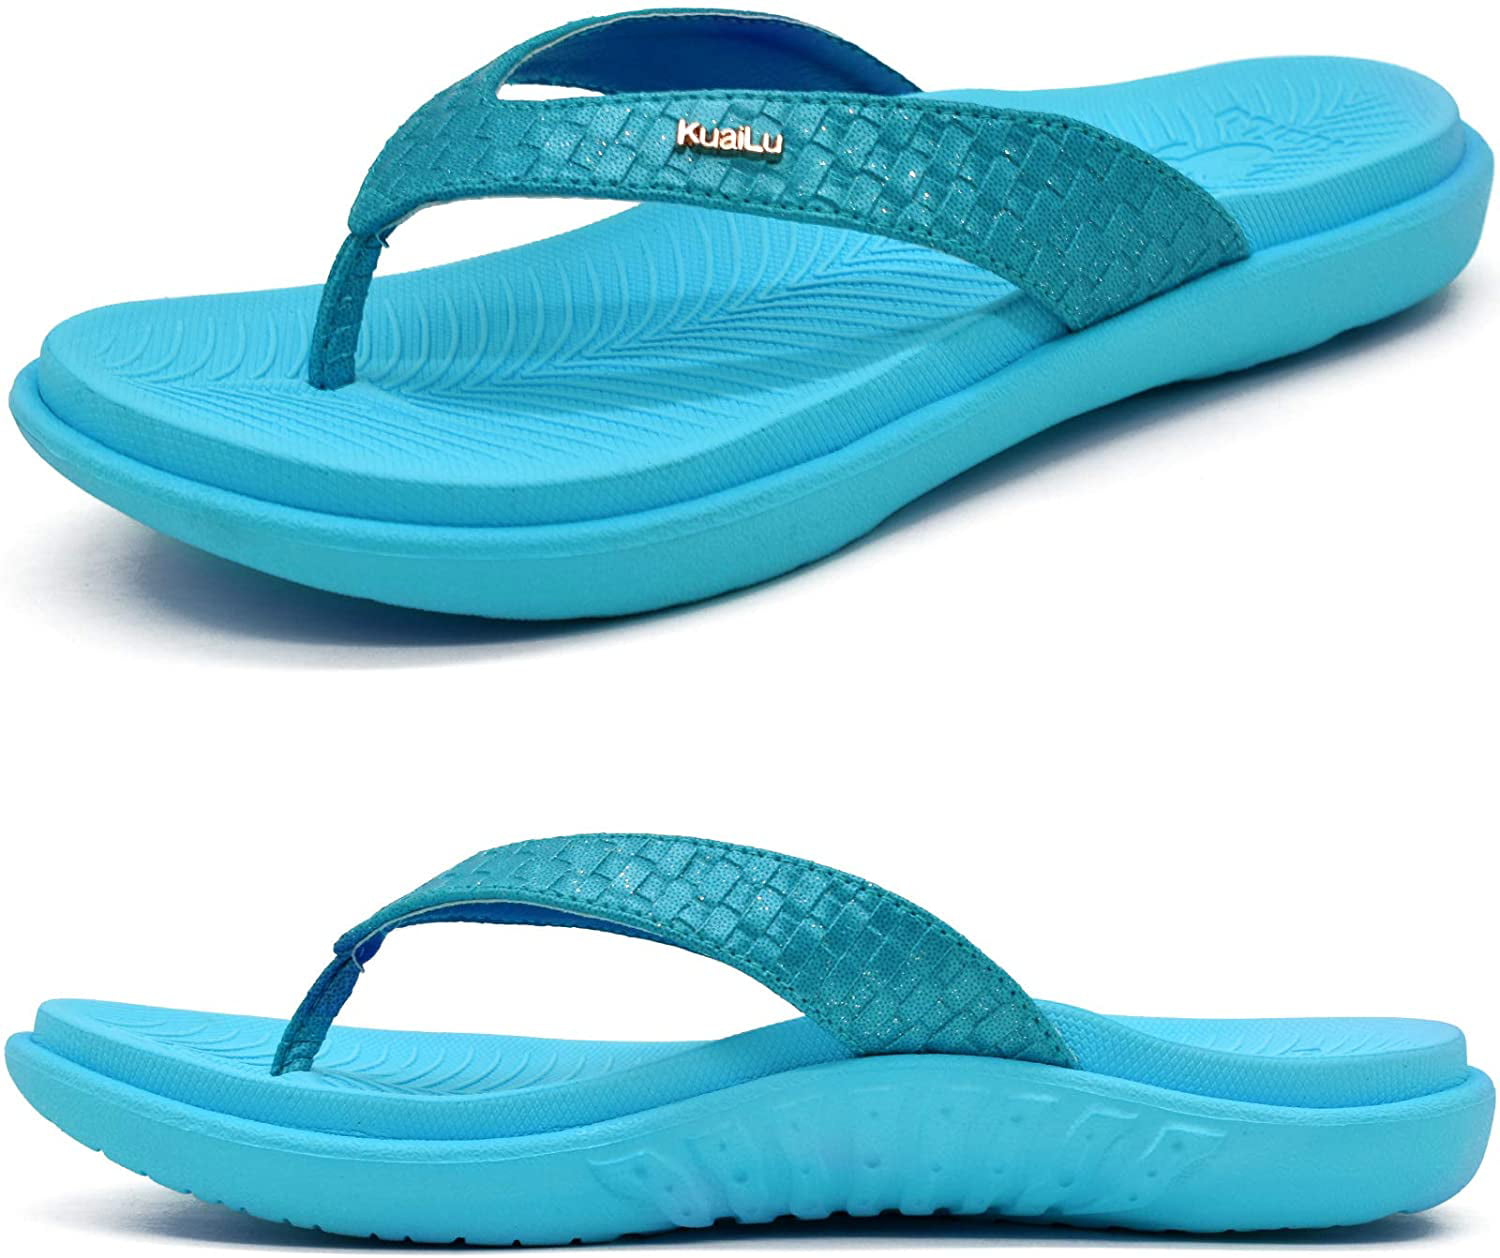 KuaiLu Mens Leather Sport Flip Flops Comfort Arch Support Thong Sandals with Soft Insole for Outdoor Beach 